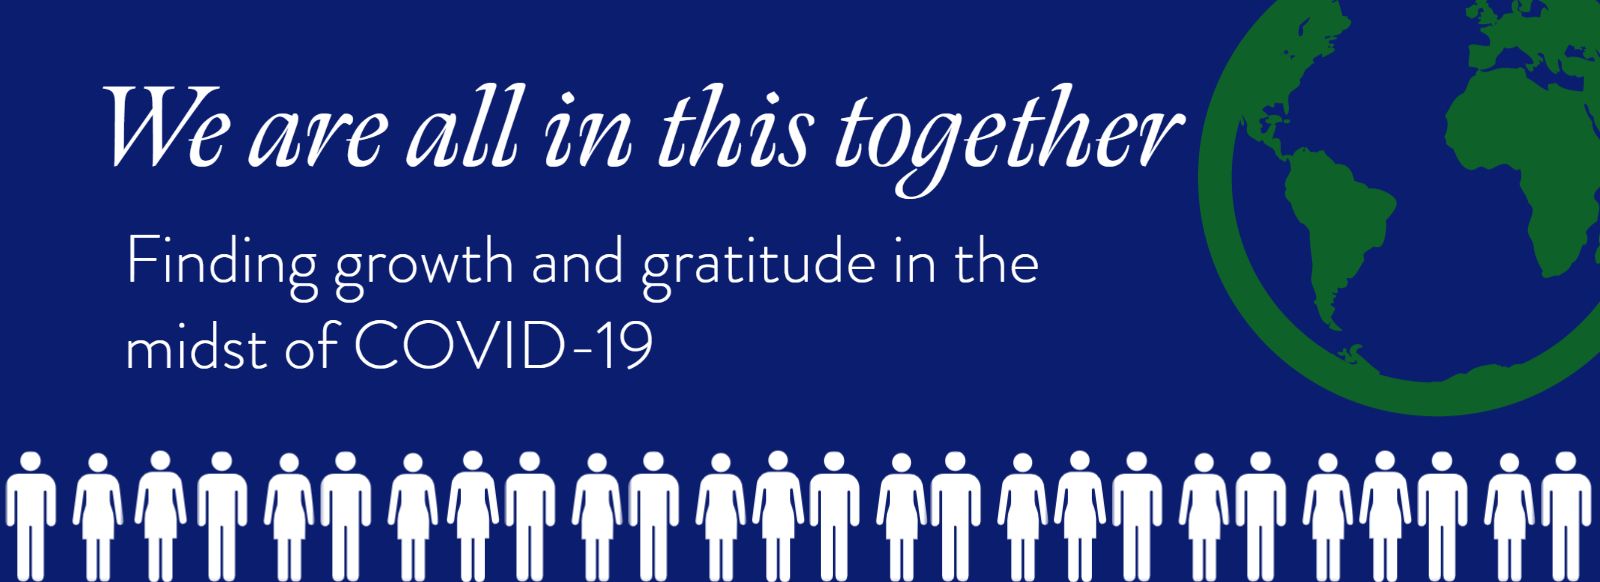 We are all in this together: Finding growth and gratitude in the midst of COVID-19